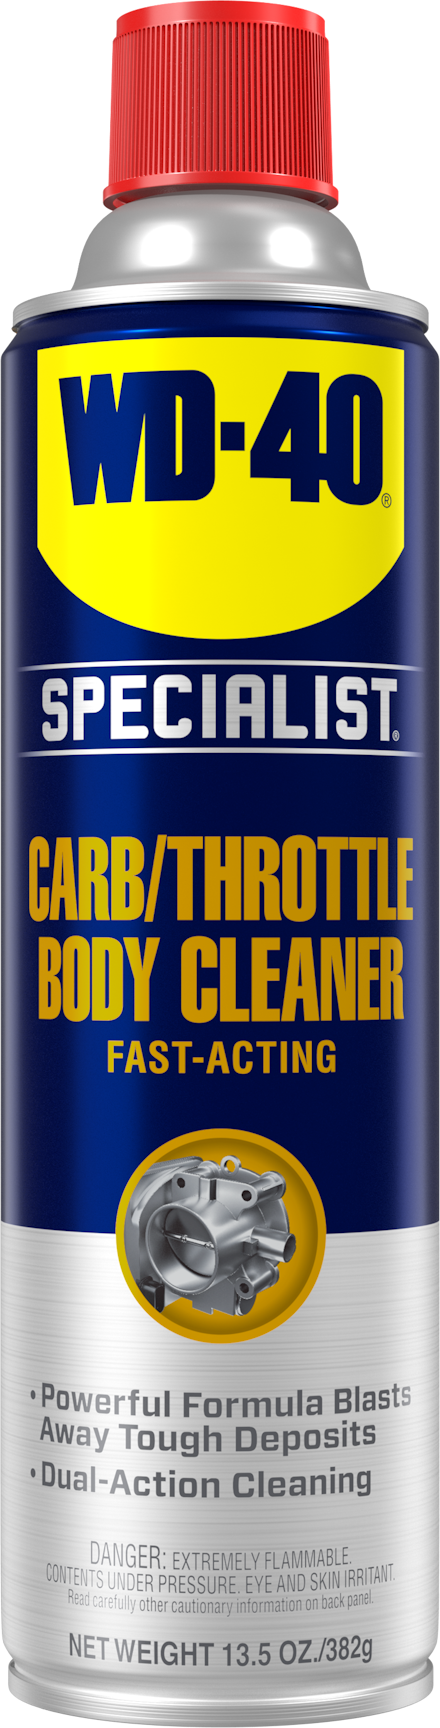 927244-5 CRC Carburetor Cleaner;Aerosol Can;16 oz.;Flammable;Non  Chlorinated